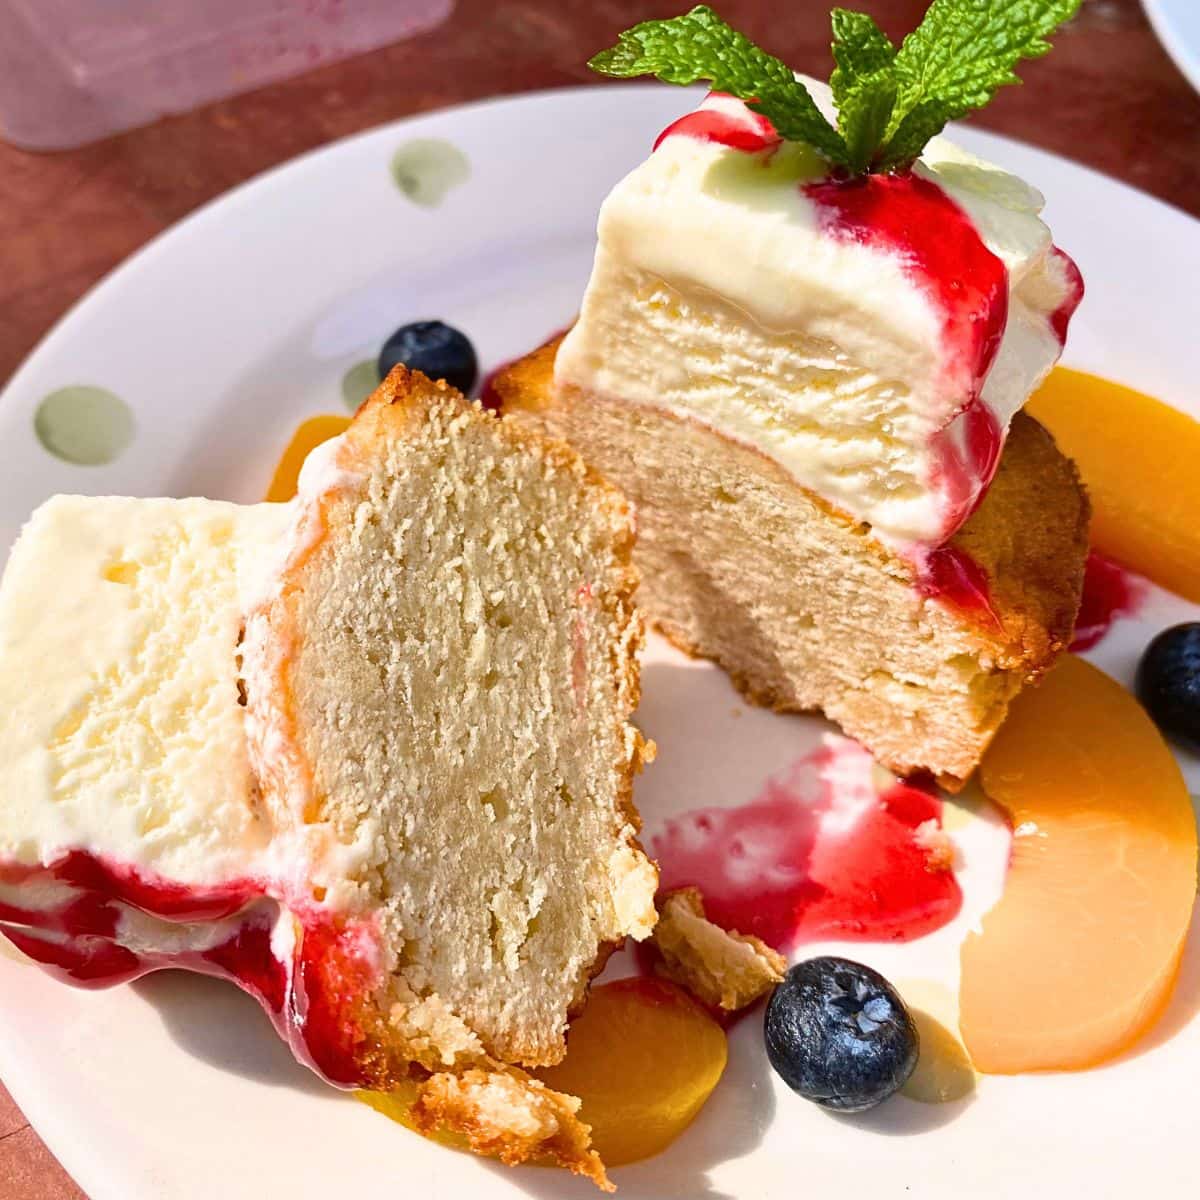 Mastro Butter cake on a white plate with fruits.